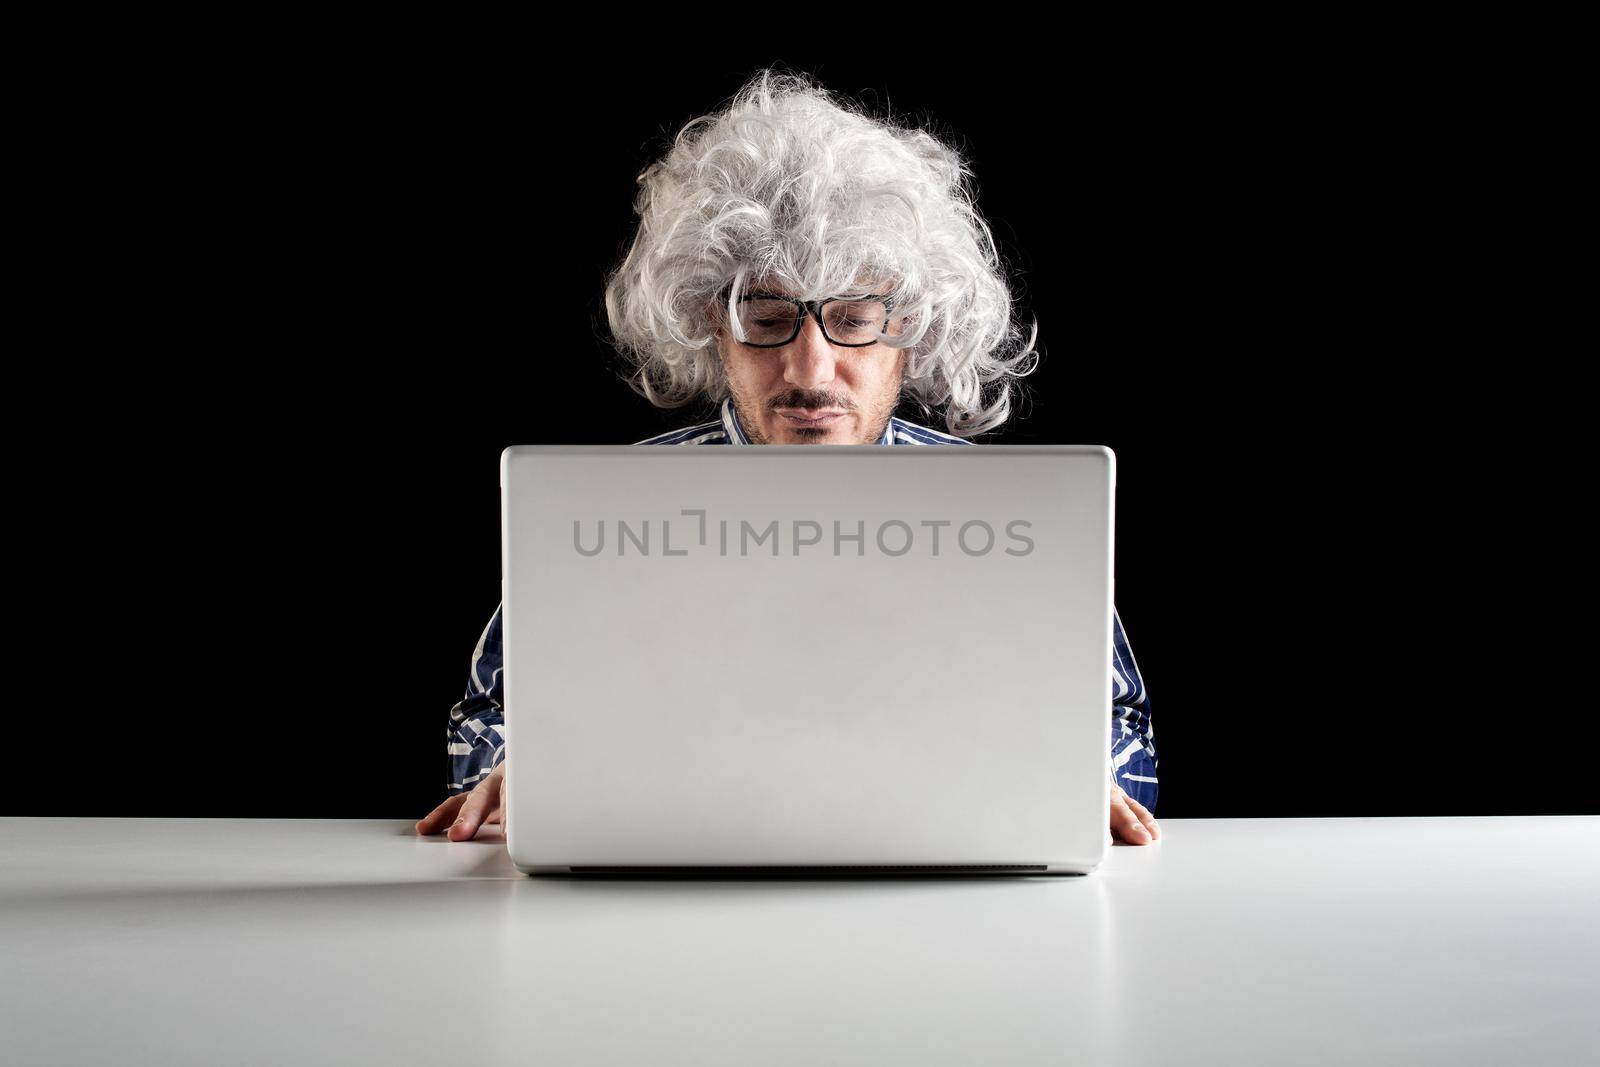 A boomer senior-focused concentrated sit at the desk looking at laptop computer on black background